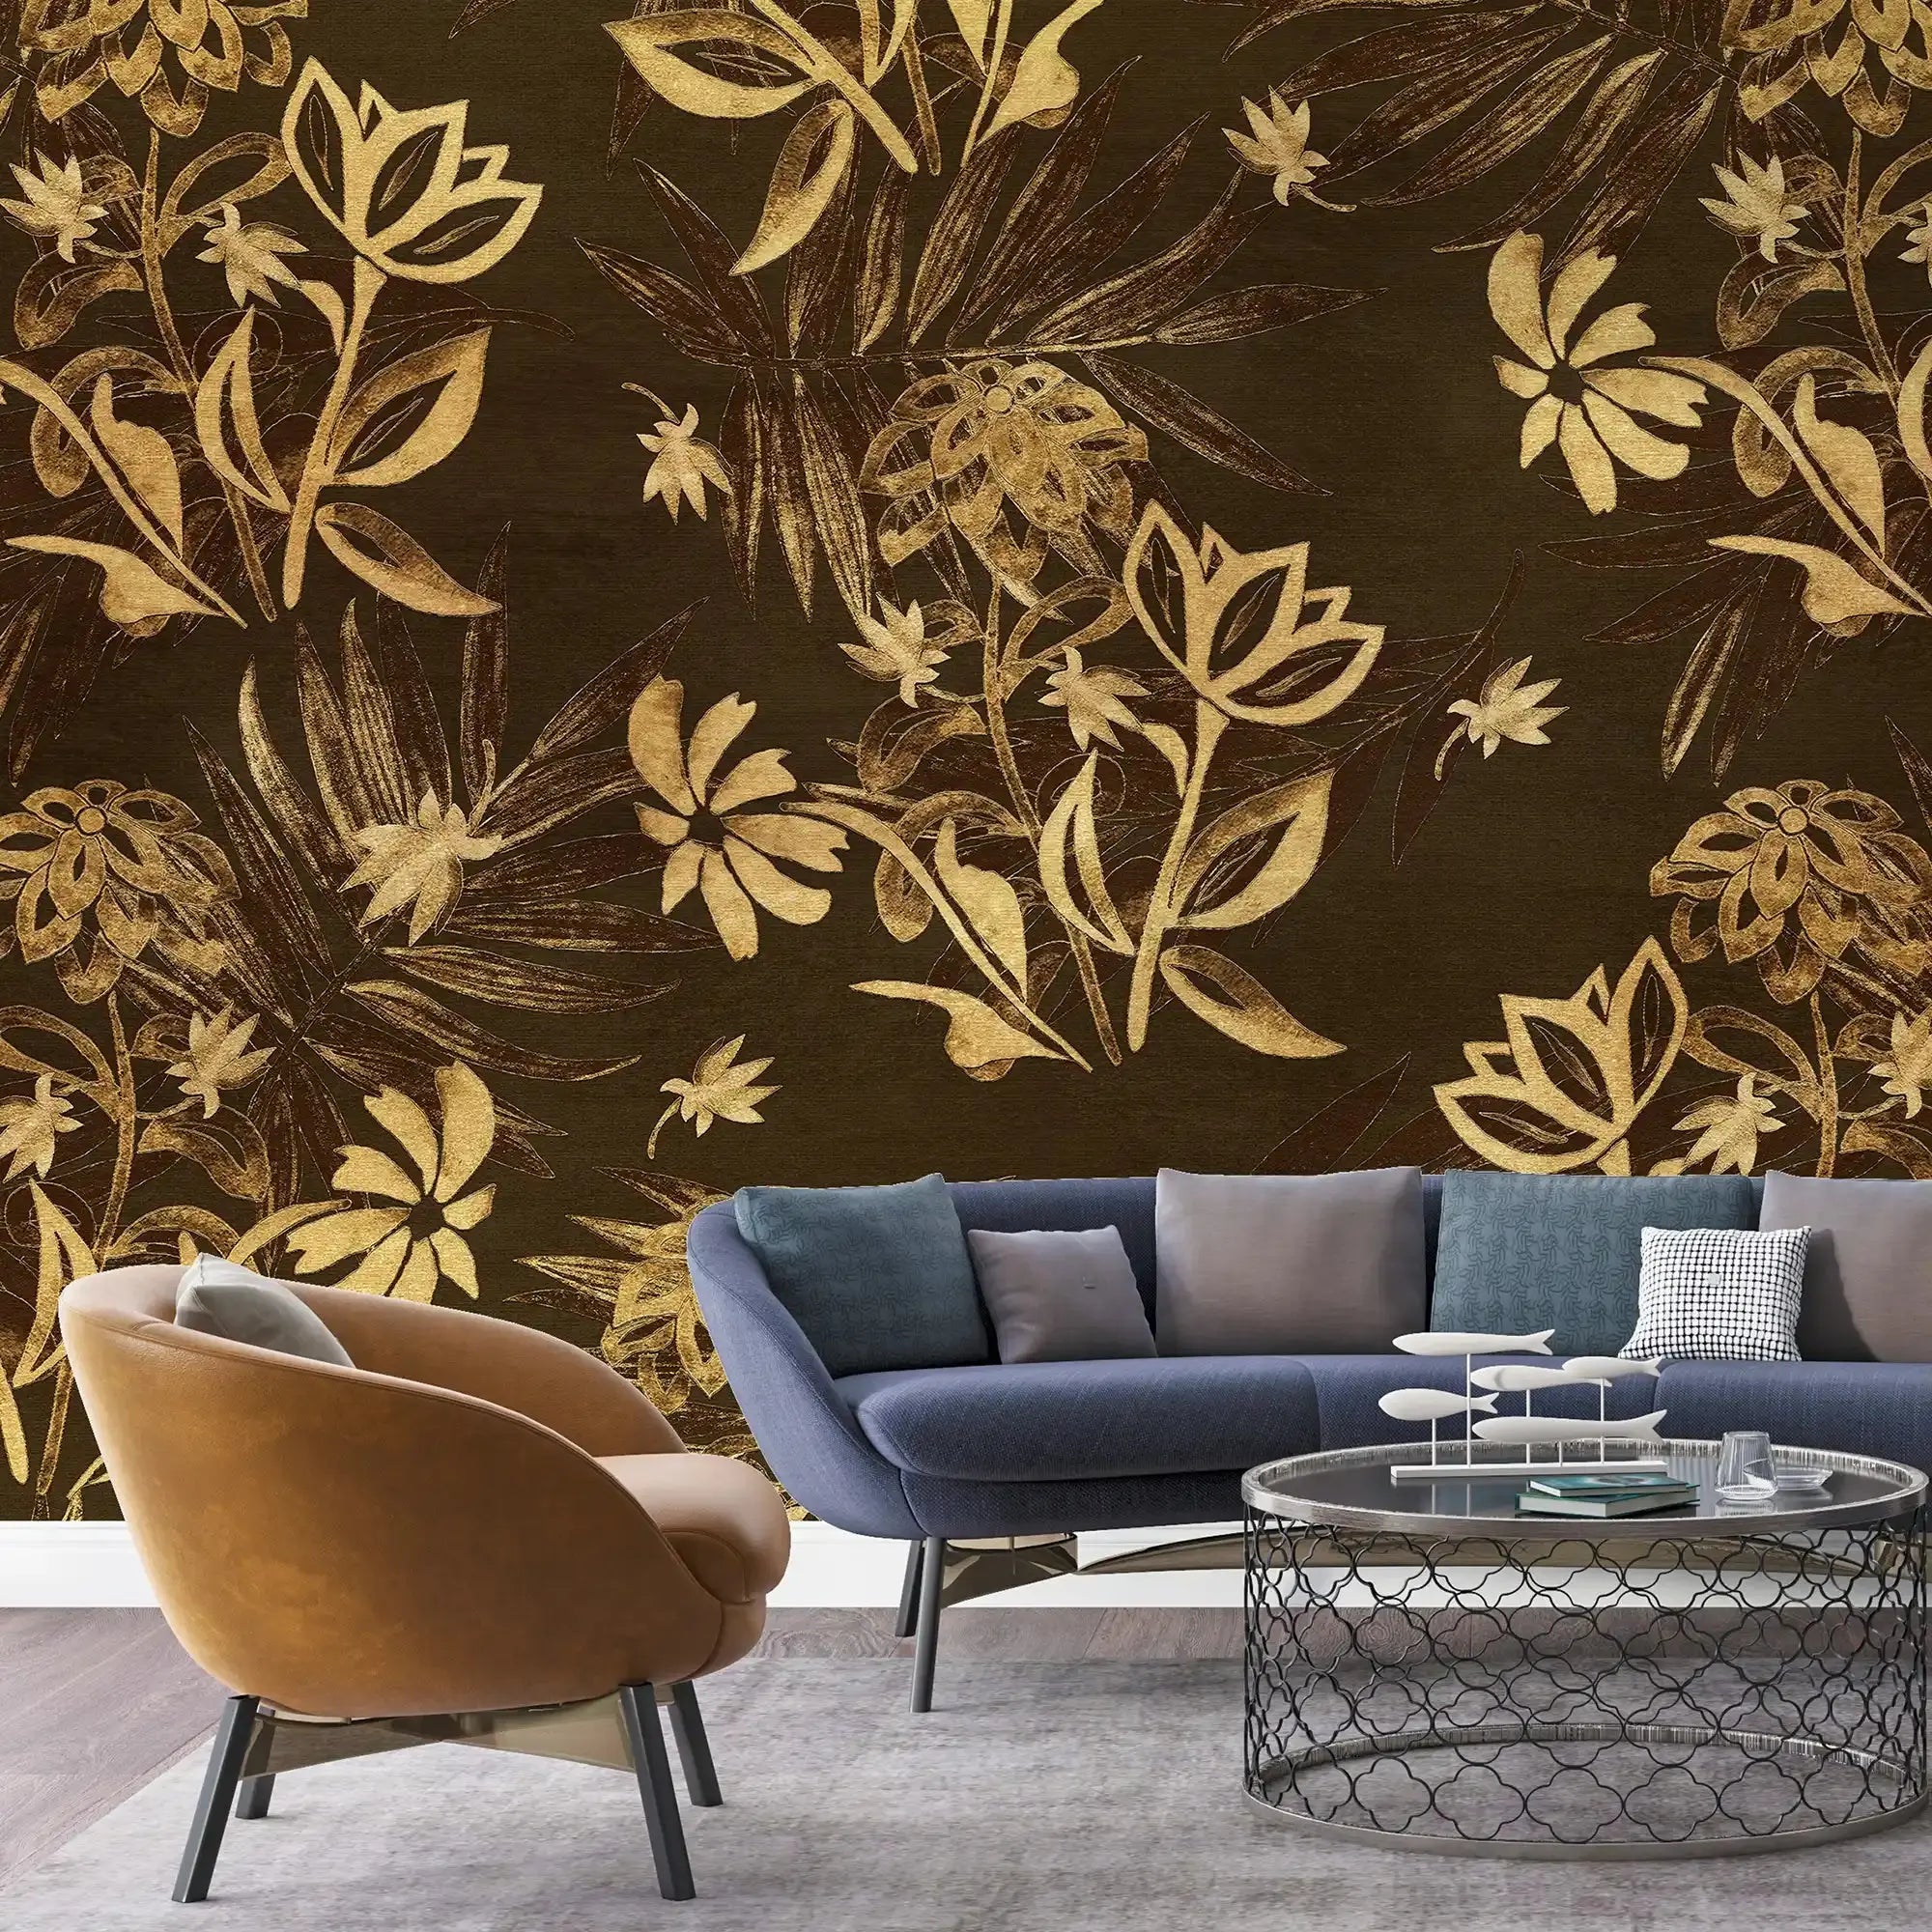 3086-E / Plant Wallpaper: Self-Adhesive, Blue Hibiscus and Cypress Pattern, Floral Wall Mural for Modern Room Decor - Artevella